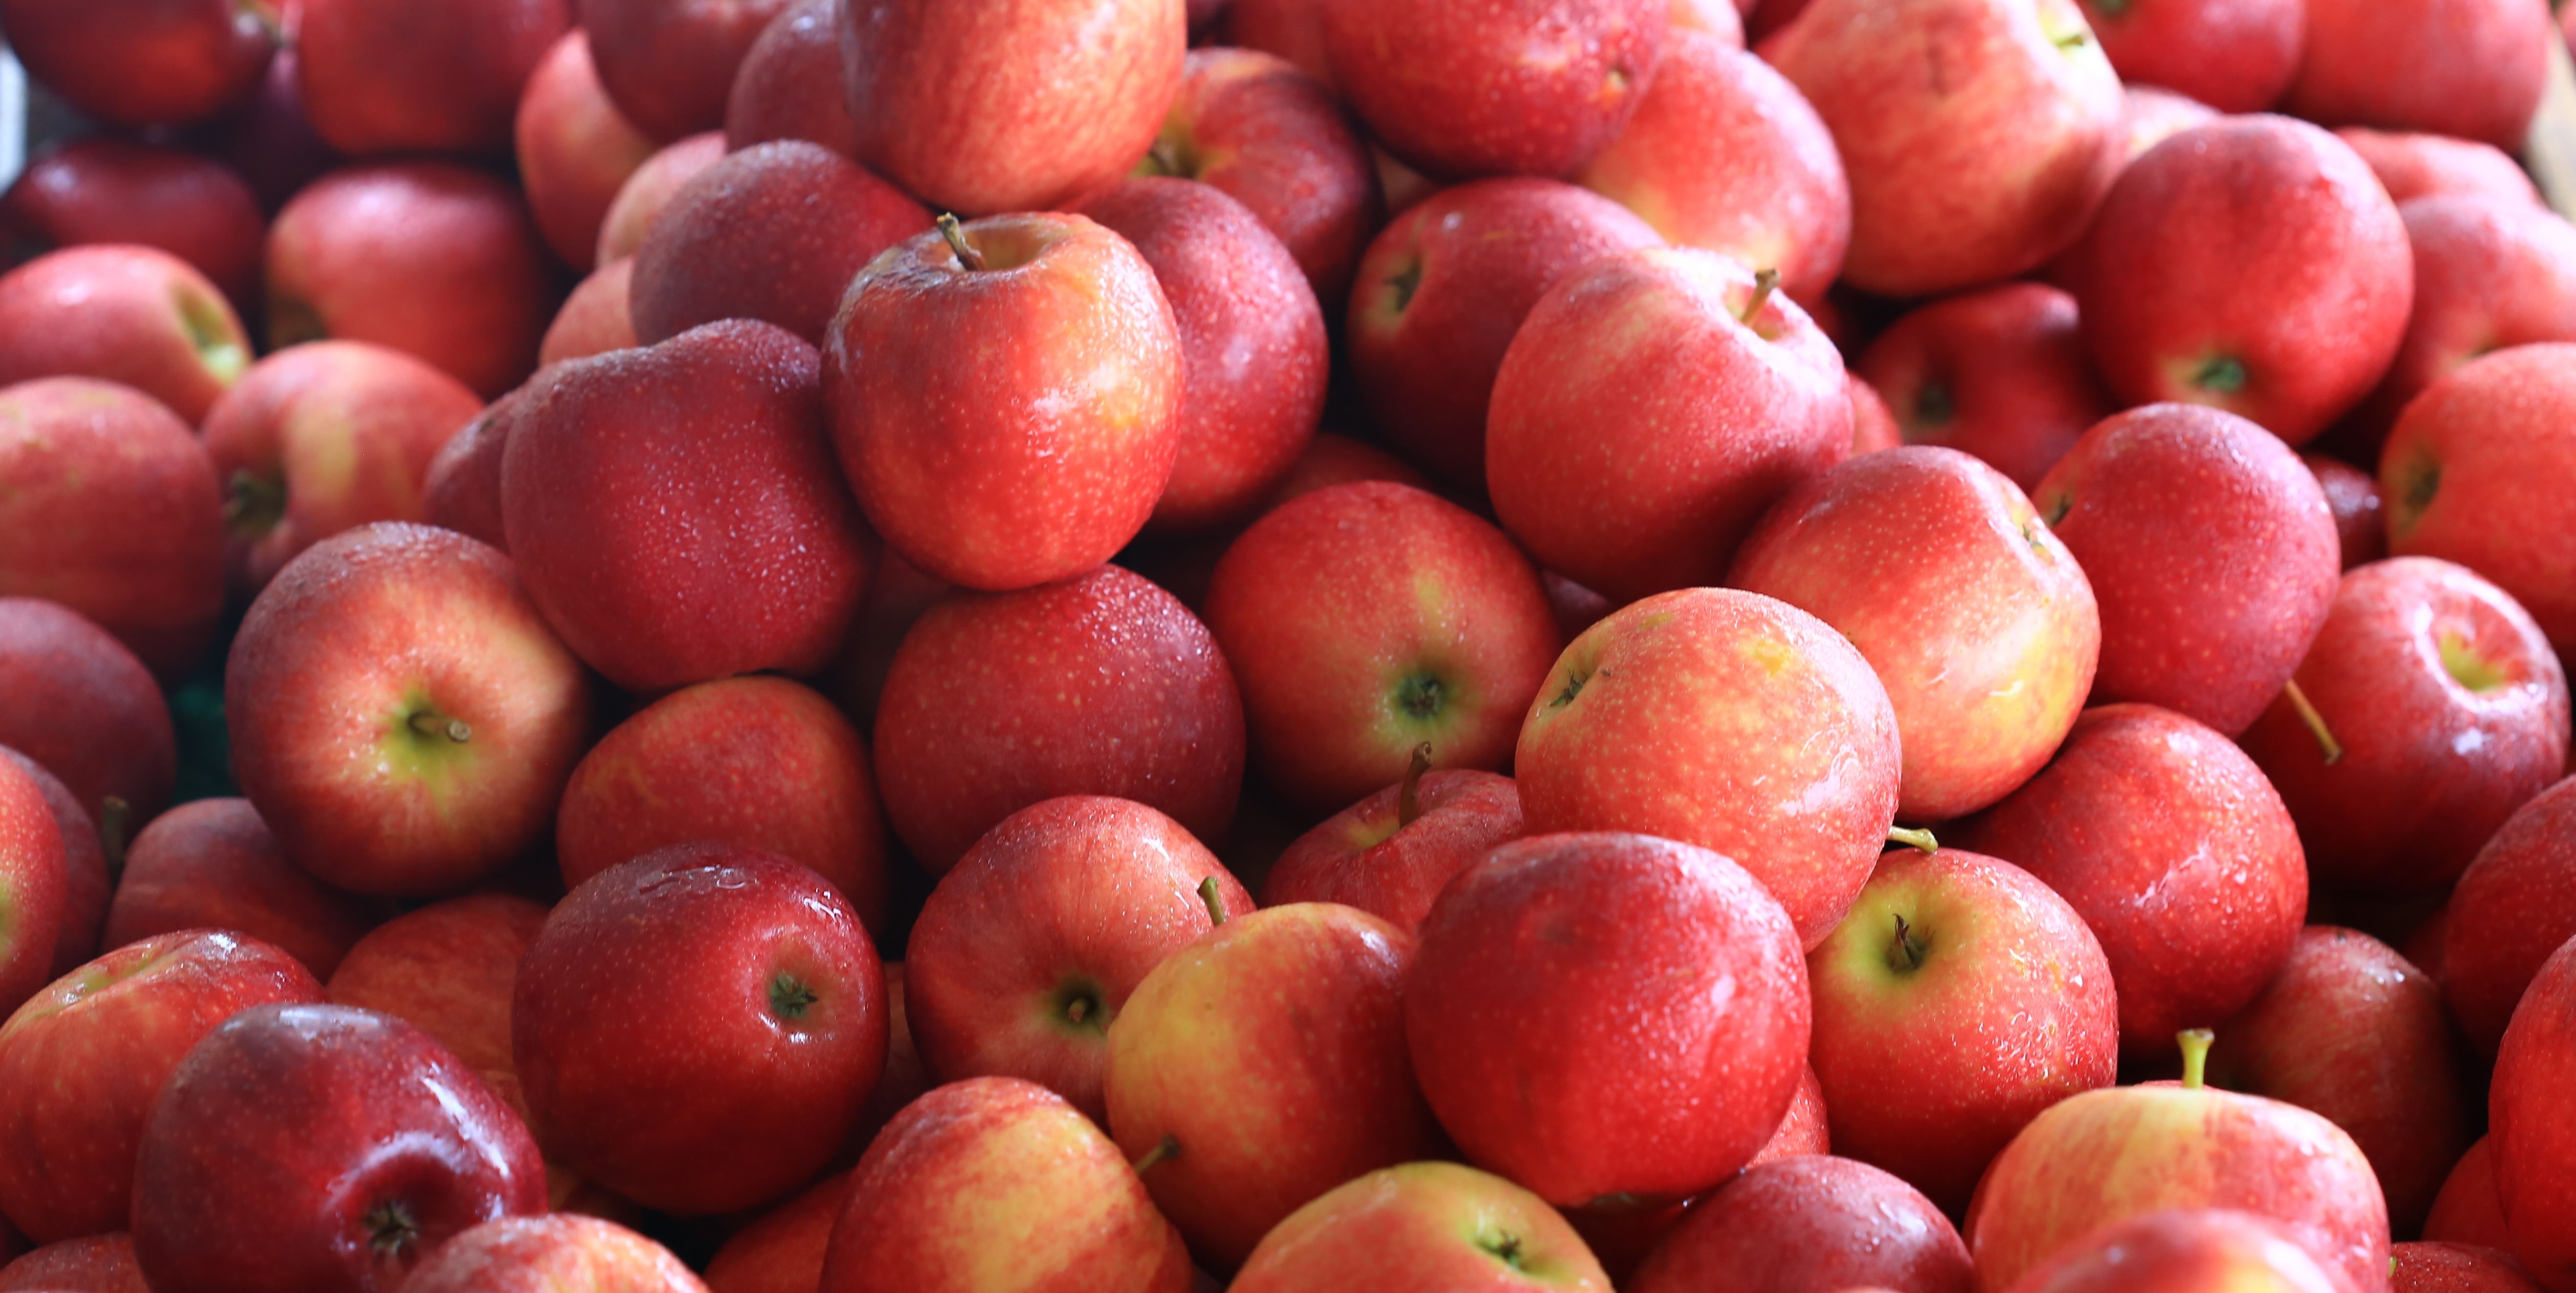 More Than 2,000 Cases Of Apples Recalled